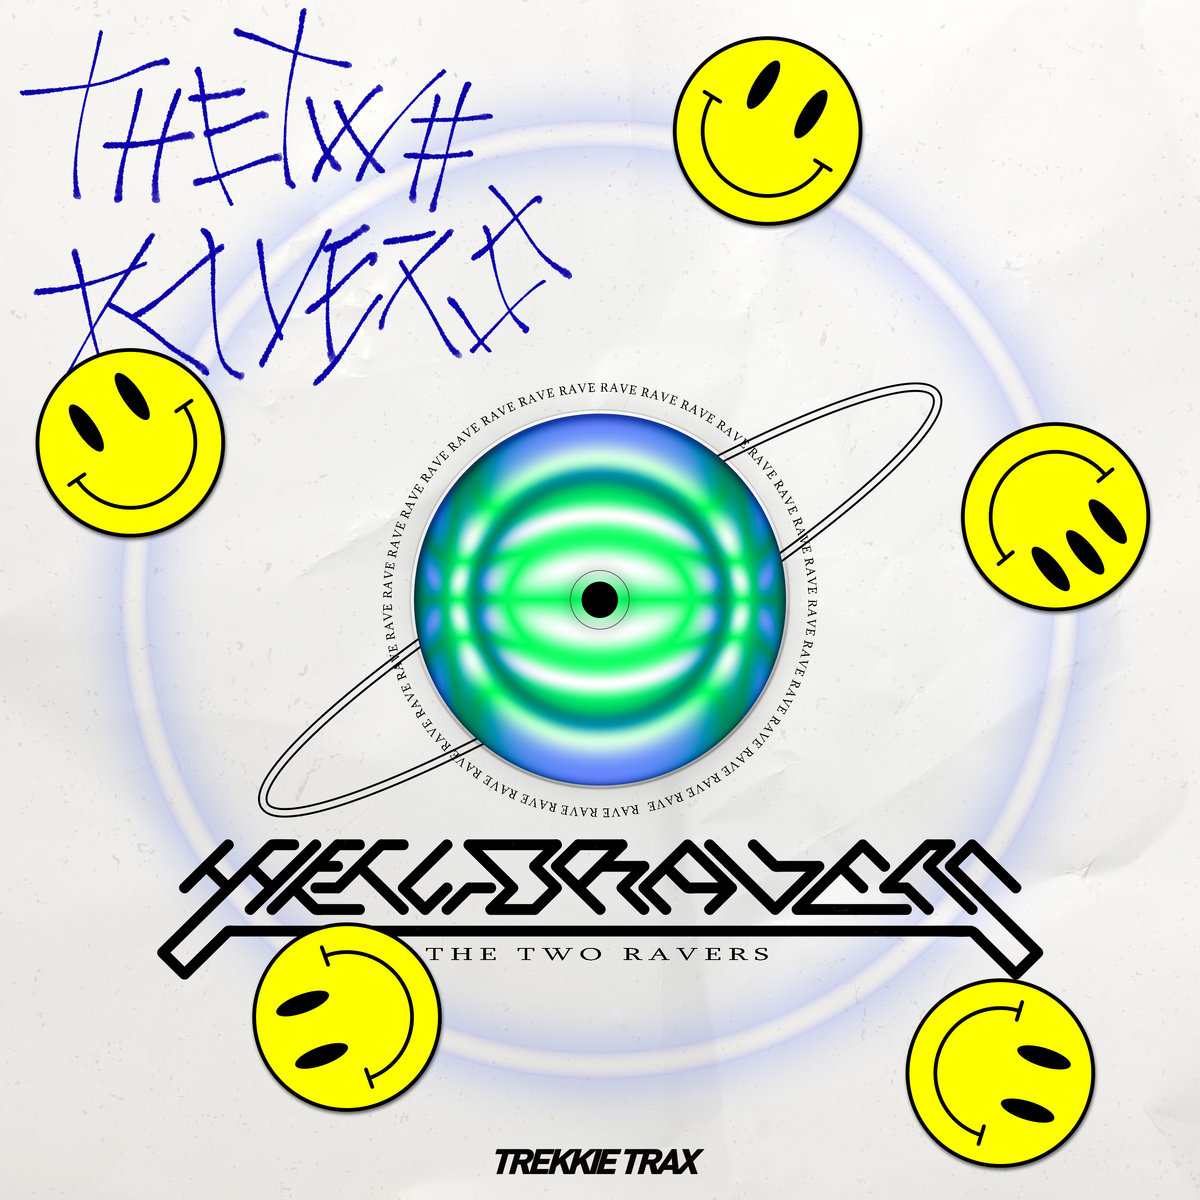 The Two Ravers EP